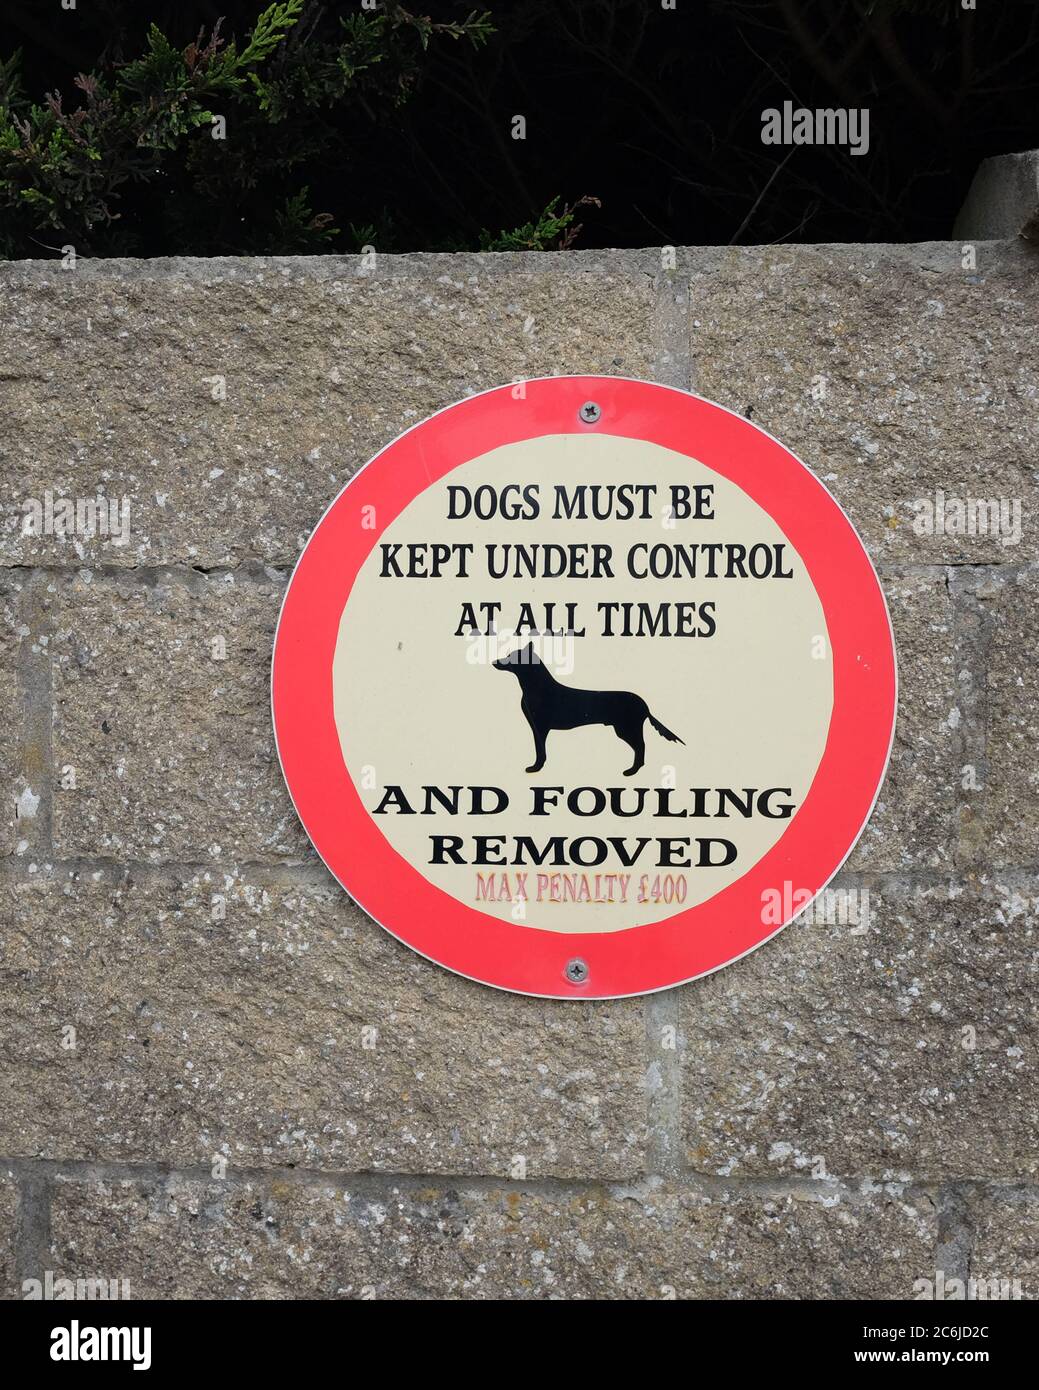 July 2020 - Dogs must be kept under control at all time and fouling removed sign in Brean, Somerset, UK Stock Photo